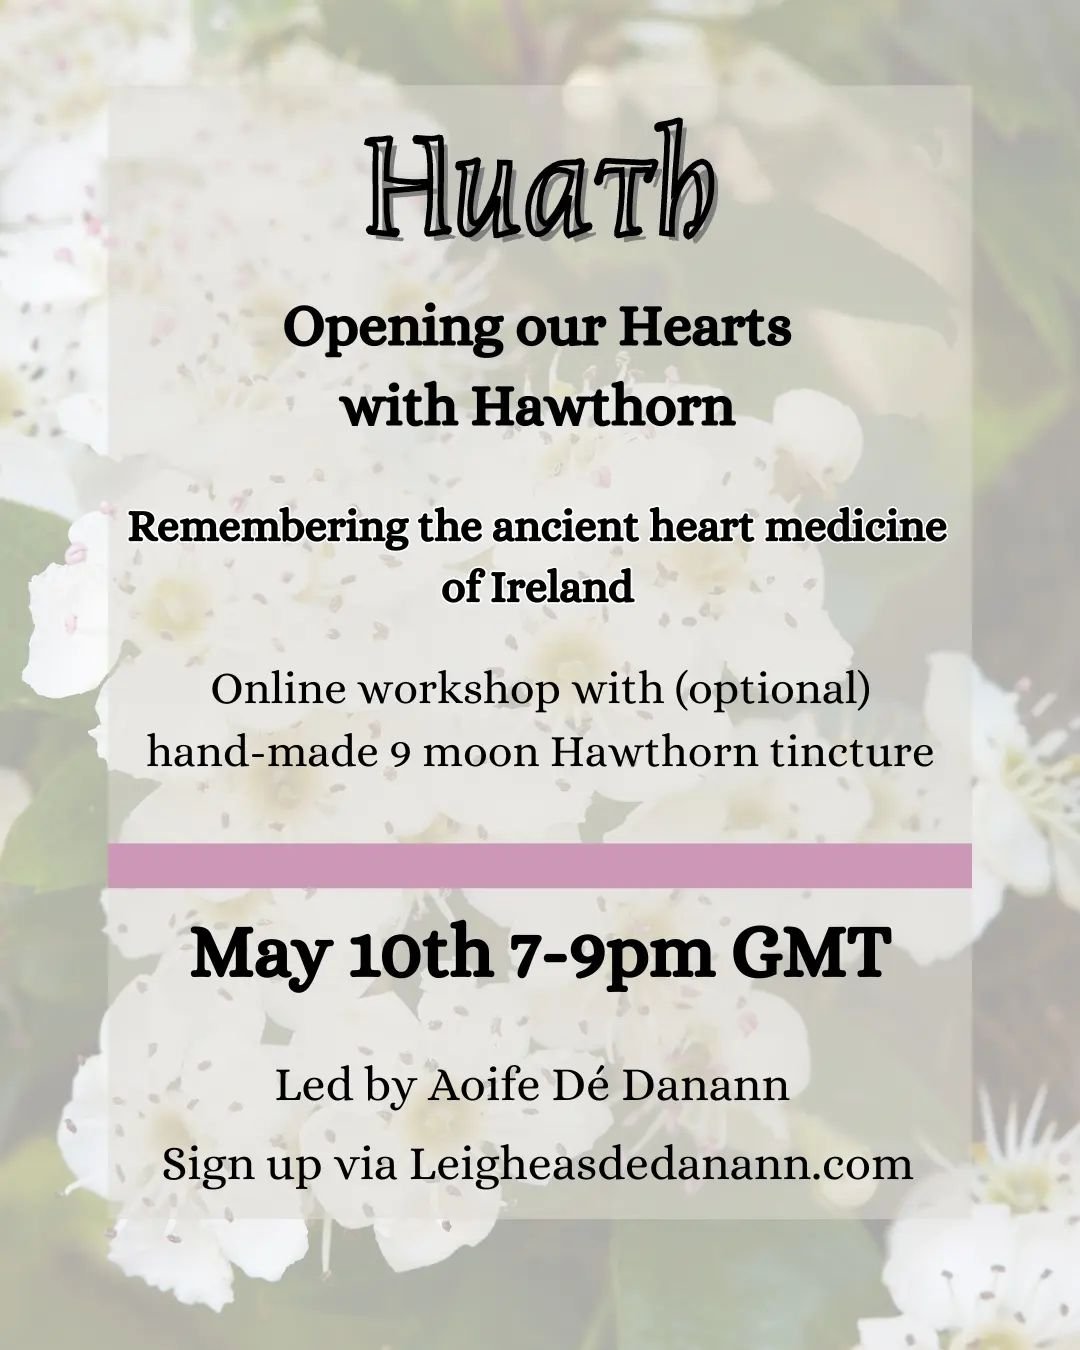 Huath - Opening our Hearts with Hawthorn 
2 hour online workshop &amp; ceremony. 

Remembering the ancient heart medicine of Ireland. 

Dia dhaoibh, 

This is an invitation to join us for an evening workshop &amp; ceremony with Huath, sacred ancient 